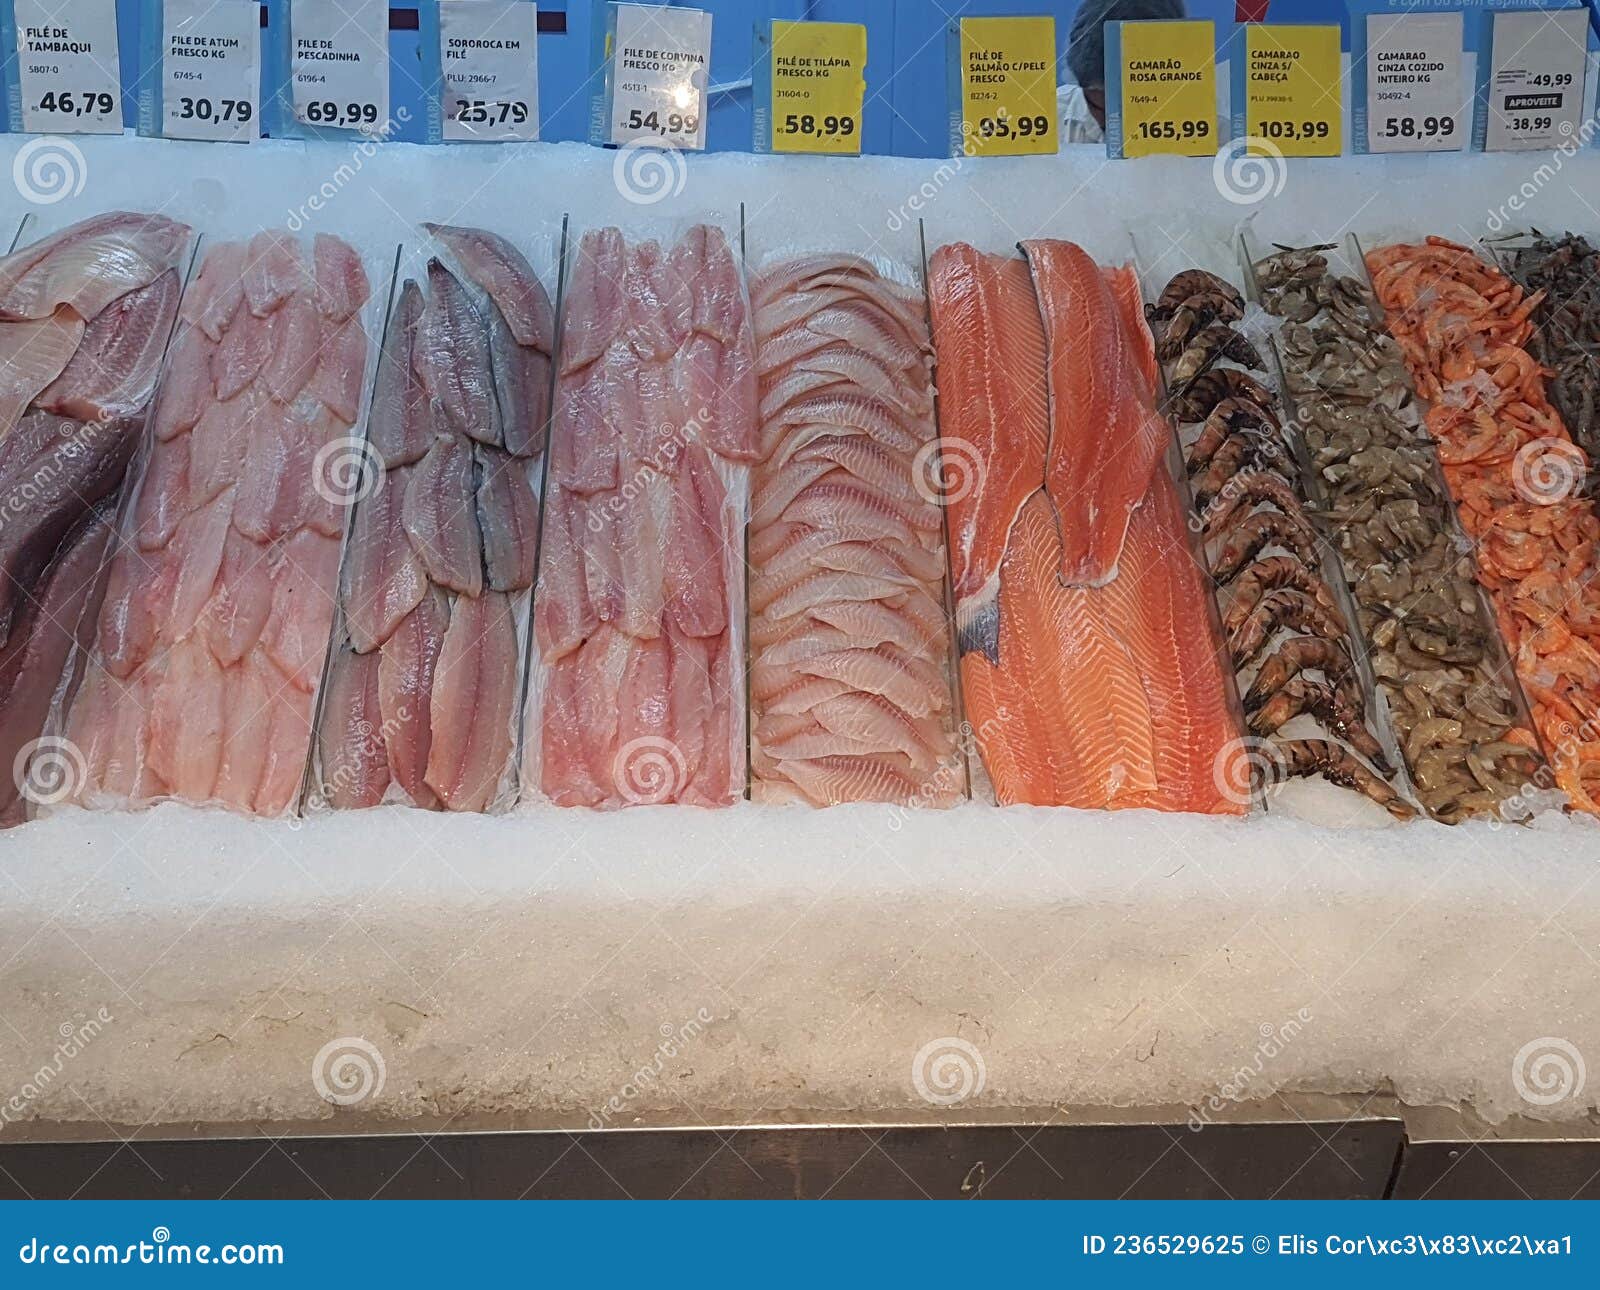 fresh fish on ice, different types, colorful, whole and fillets, in a fishmonger .